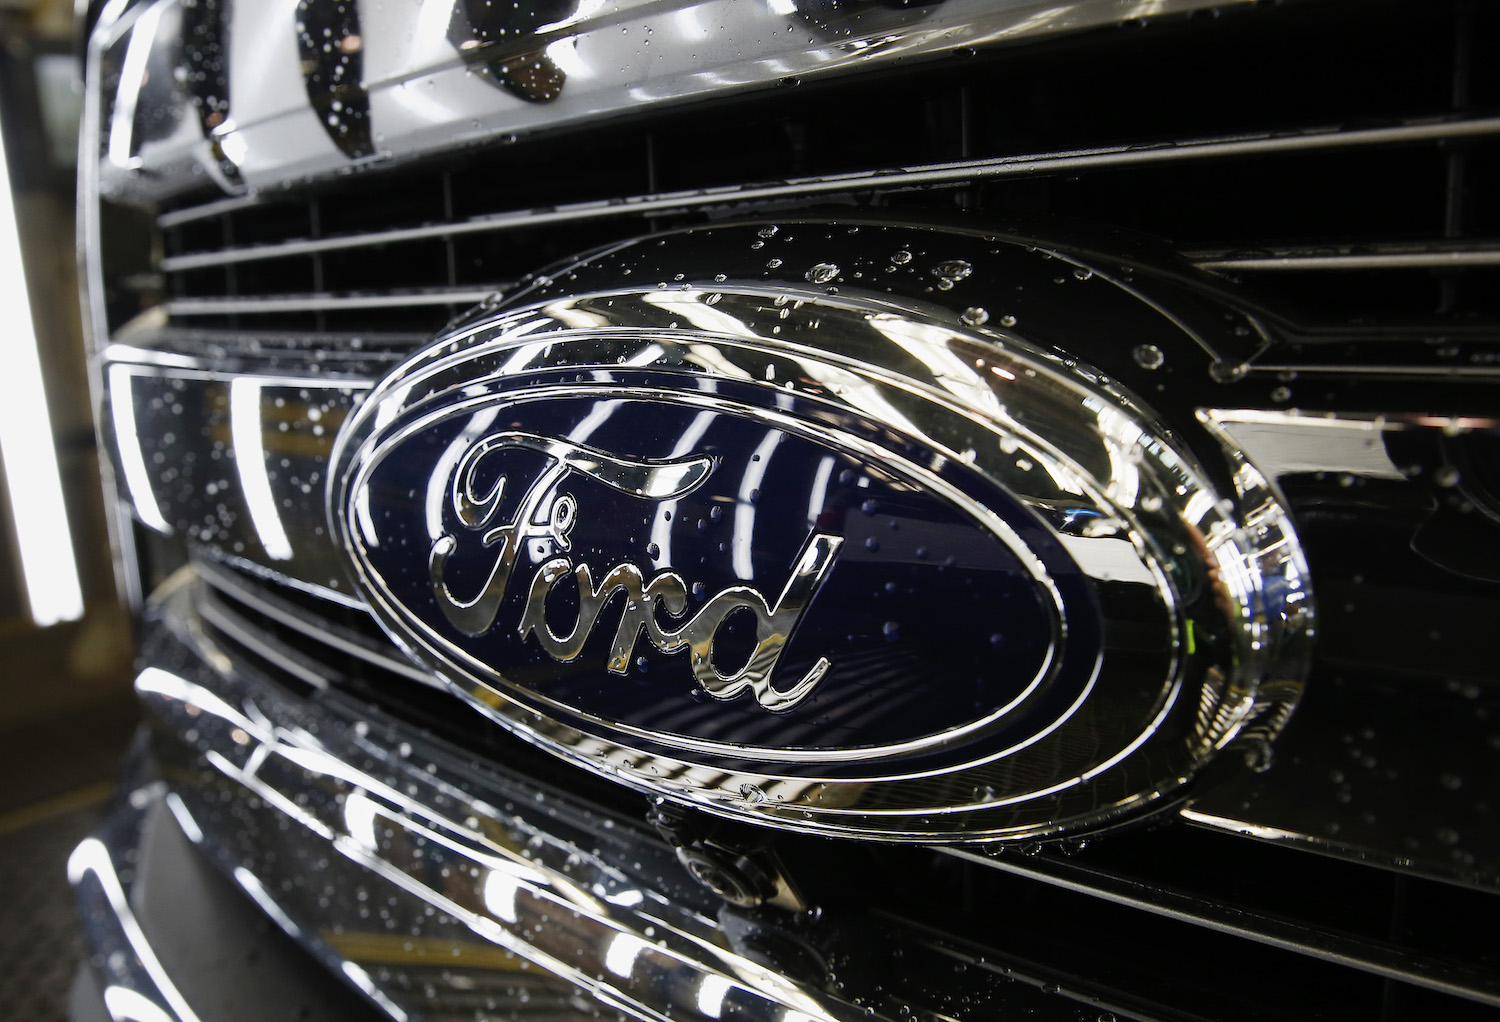 Close up of Ford Blue Oval logo on chrome grille of reliable used American F-150 truck.